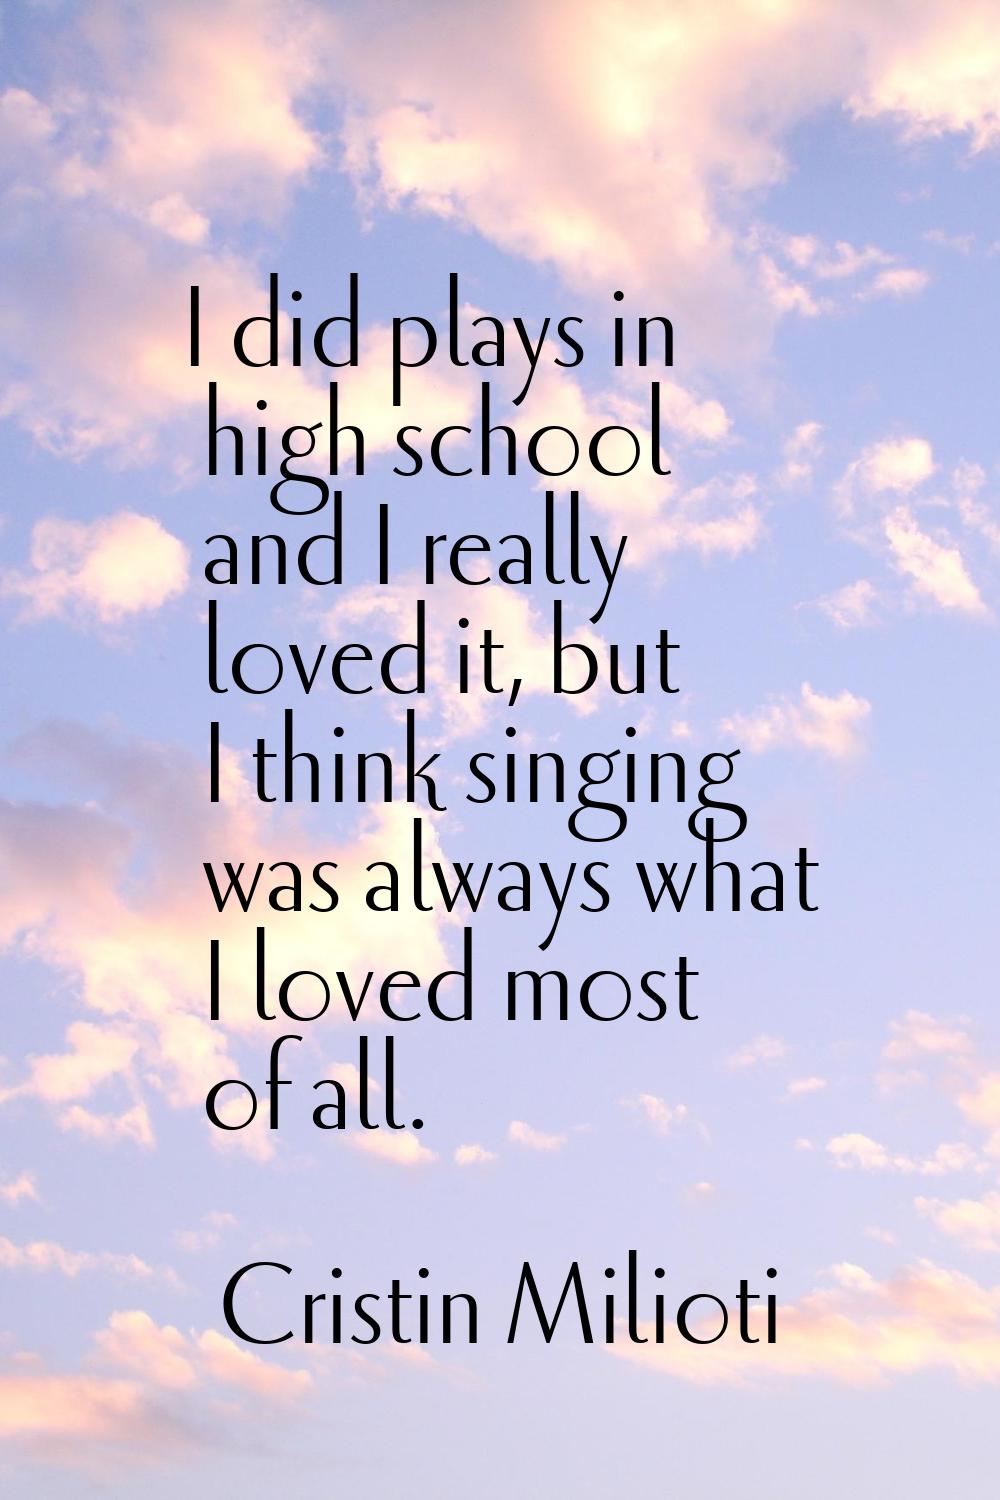 I did plays in high school and I really loved it, but I think singing was always what I loved most 